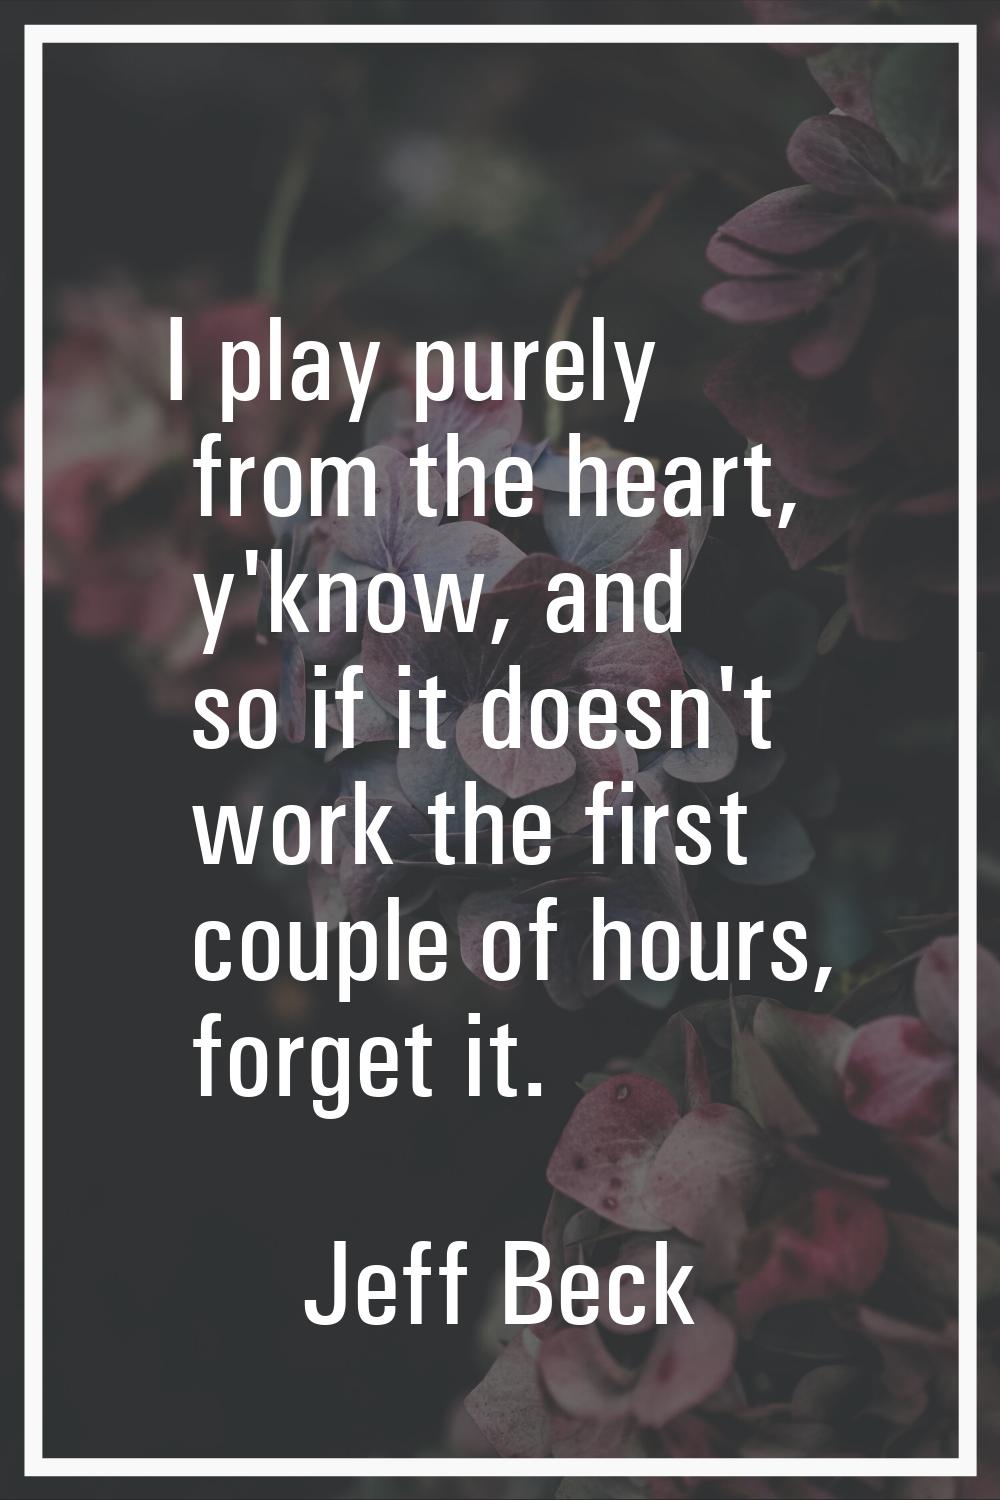 I play purely from the heart, y'know, and so if it doesn't work the first couple of hours, forget i